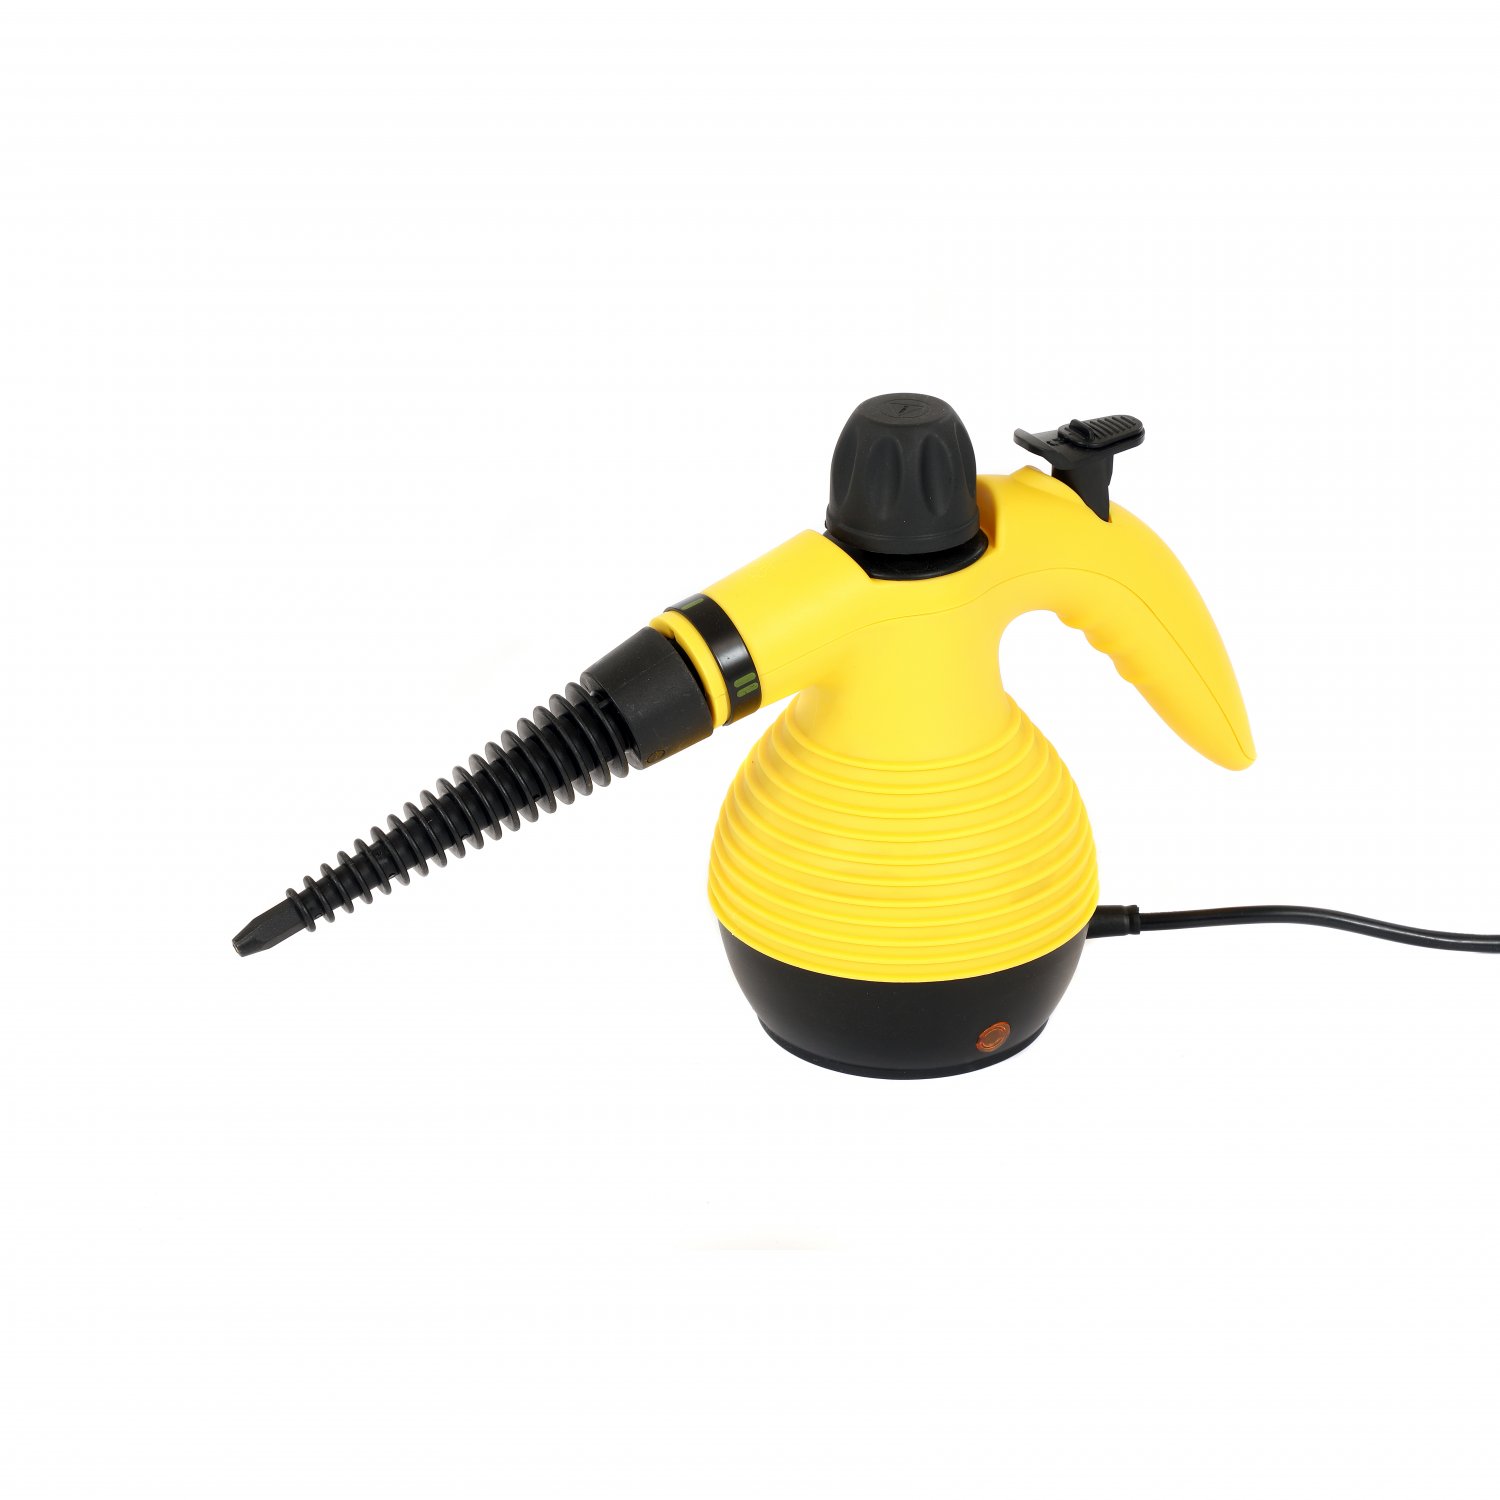 Handheld Portable Steam Cleaner Steamer with 9 Accessories